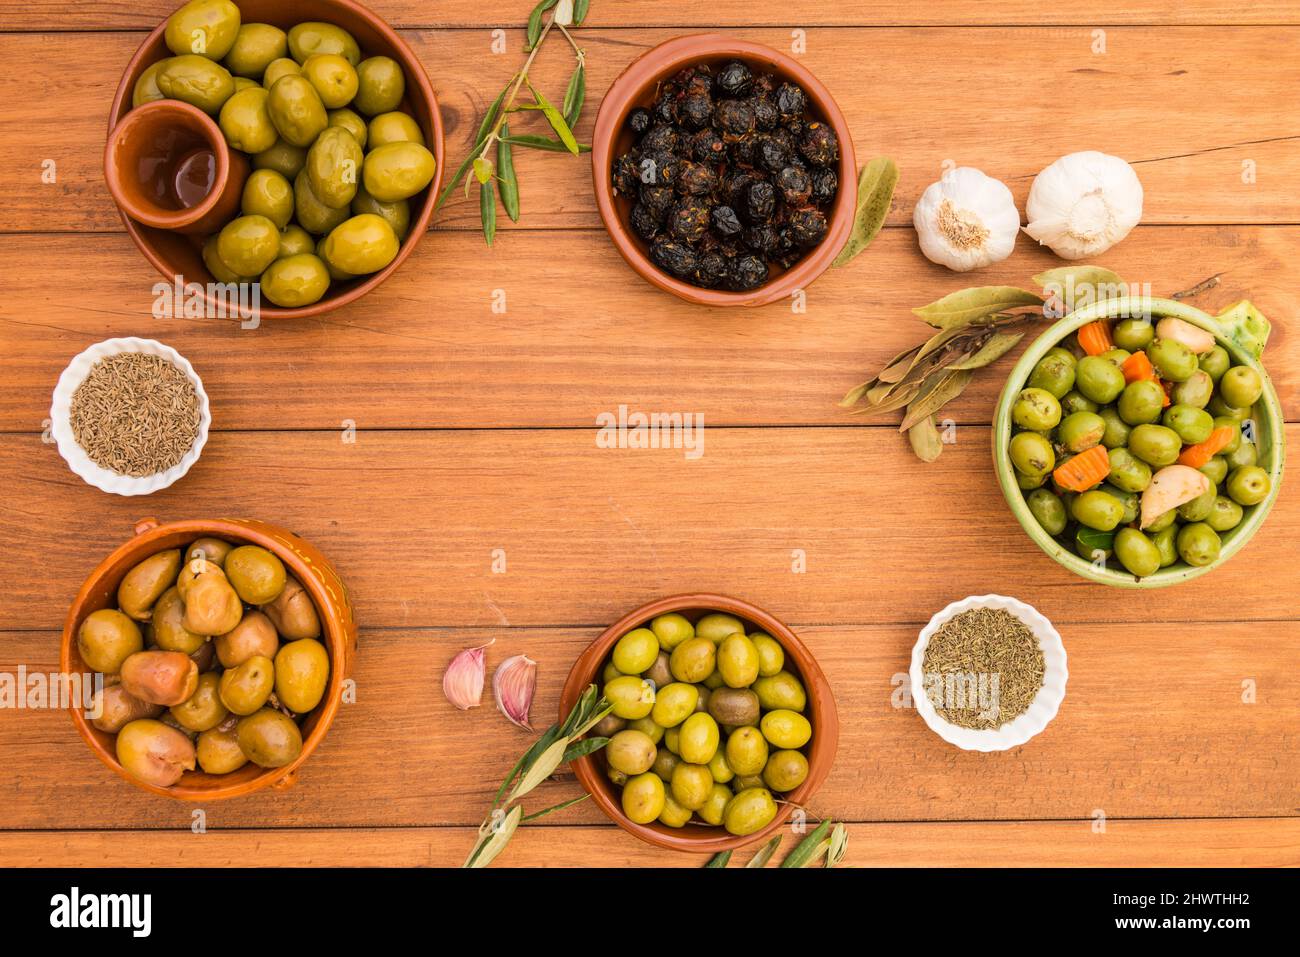 Still life with different varieties of olives, presented in bowls on wooden boards, seasoned with different traditional dressings. Traditional homemad Stock Photo